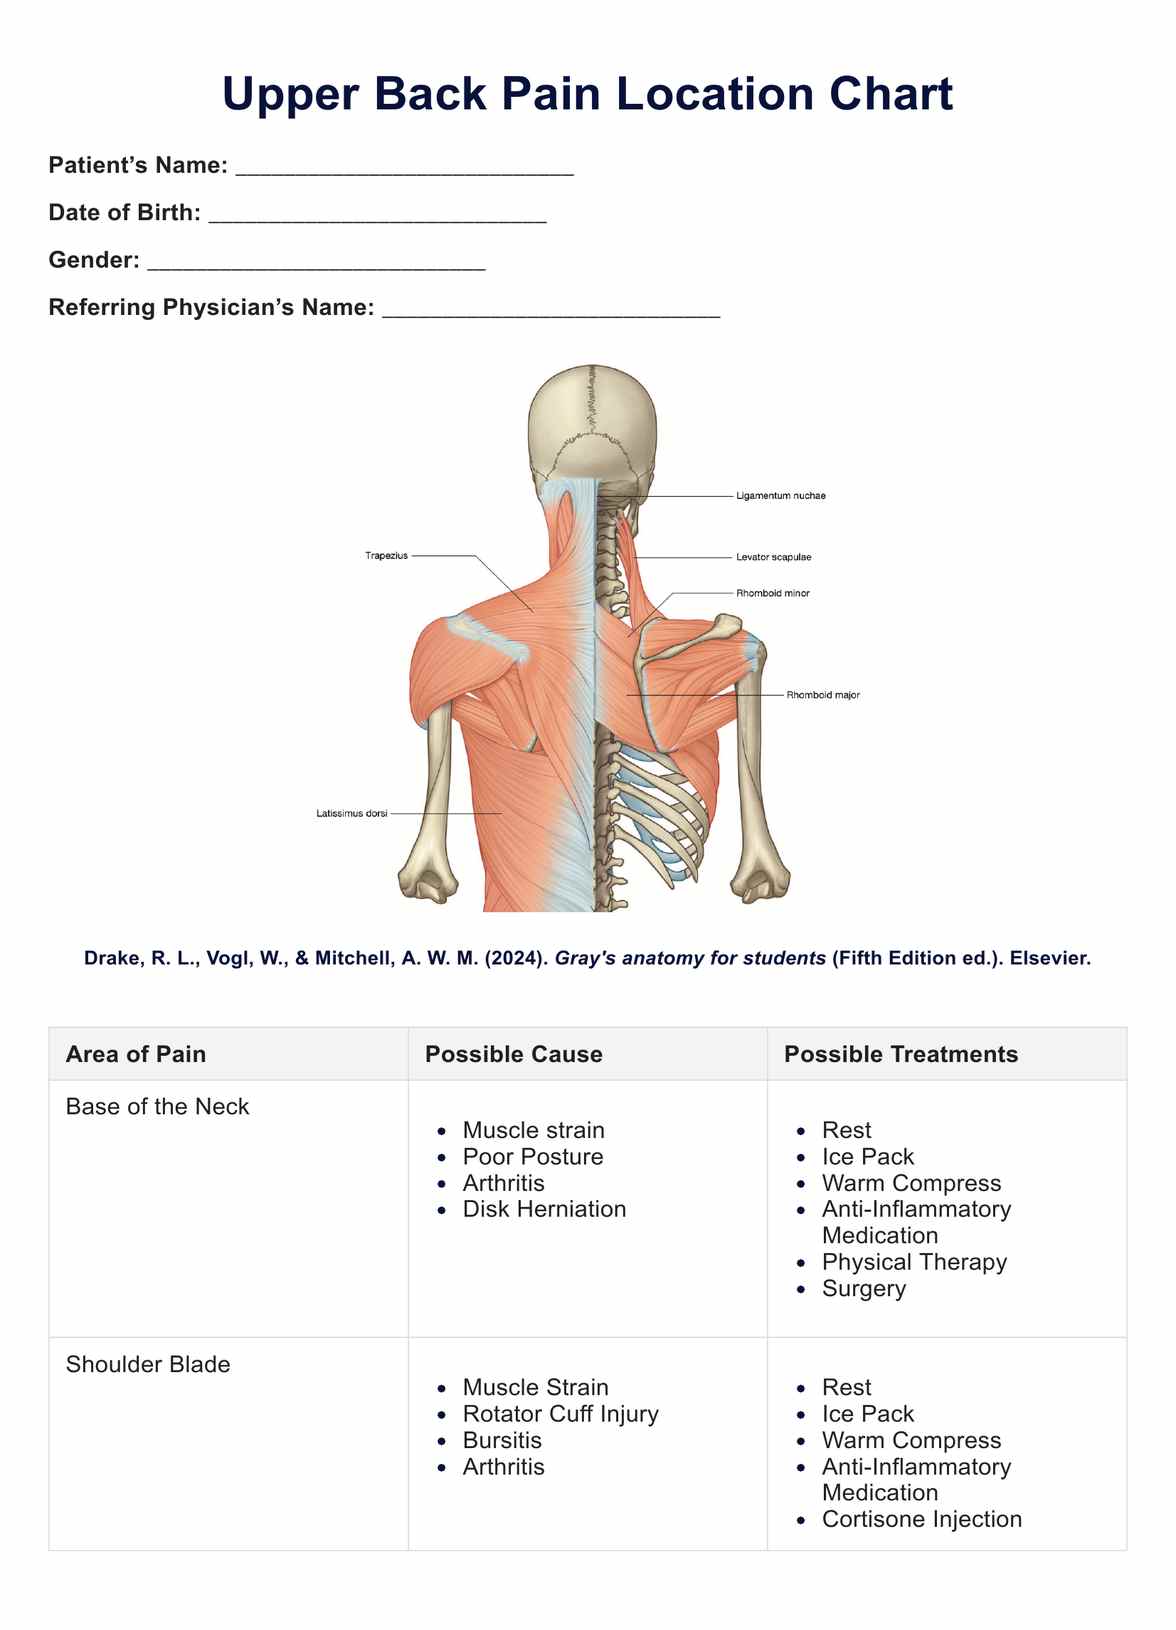 Upper Back Pain Location Chart PDF Example